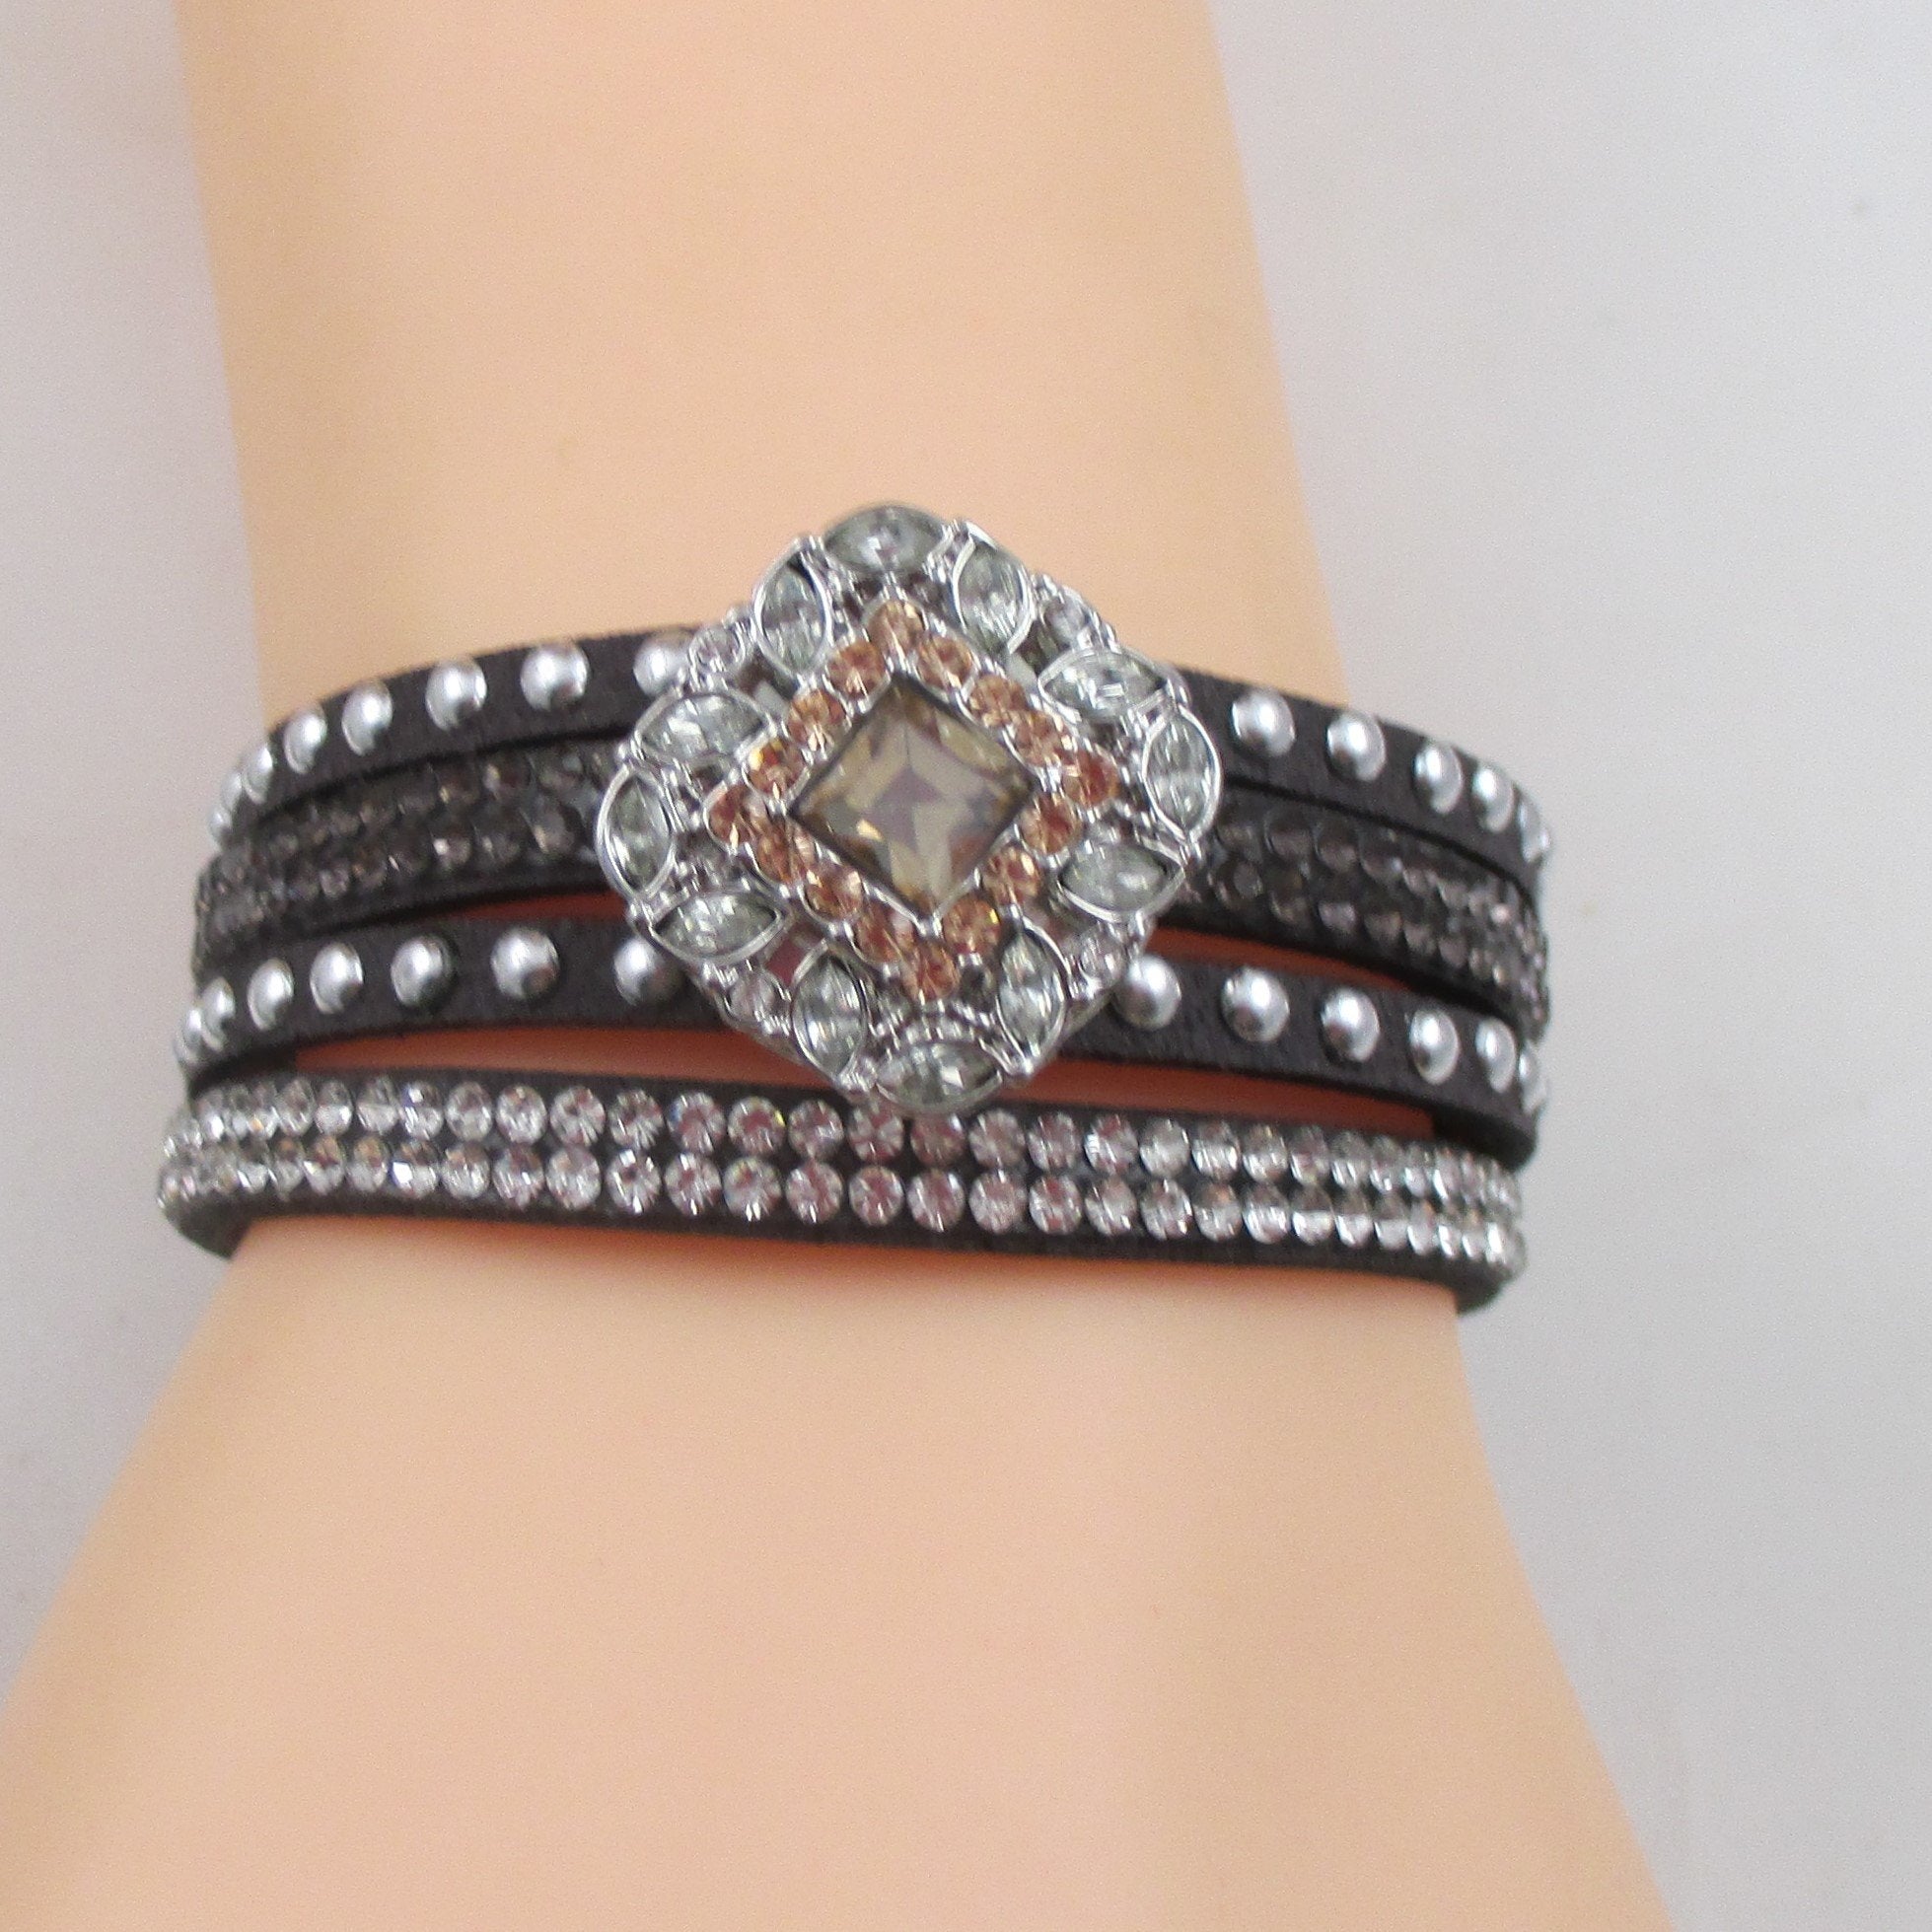 cuff bracelets with sparkles in leather